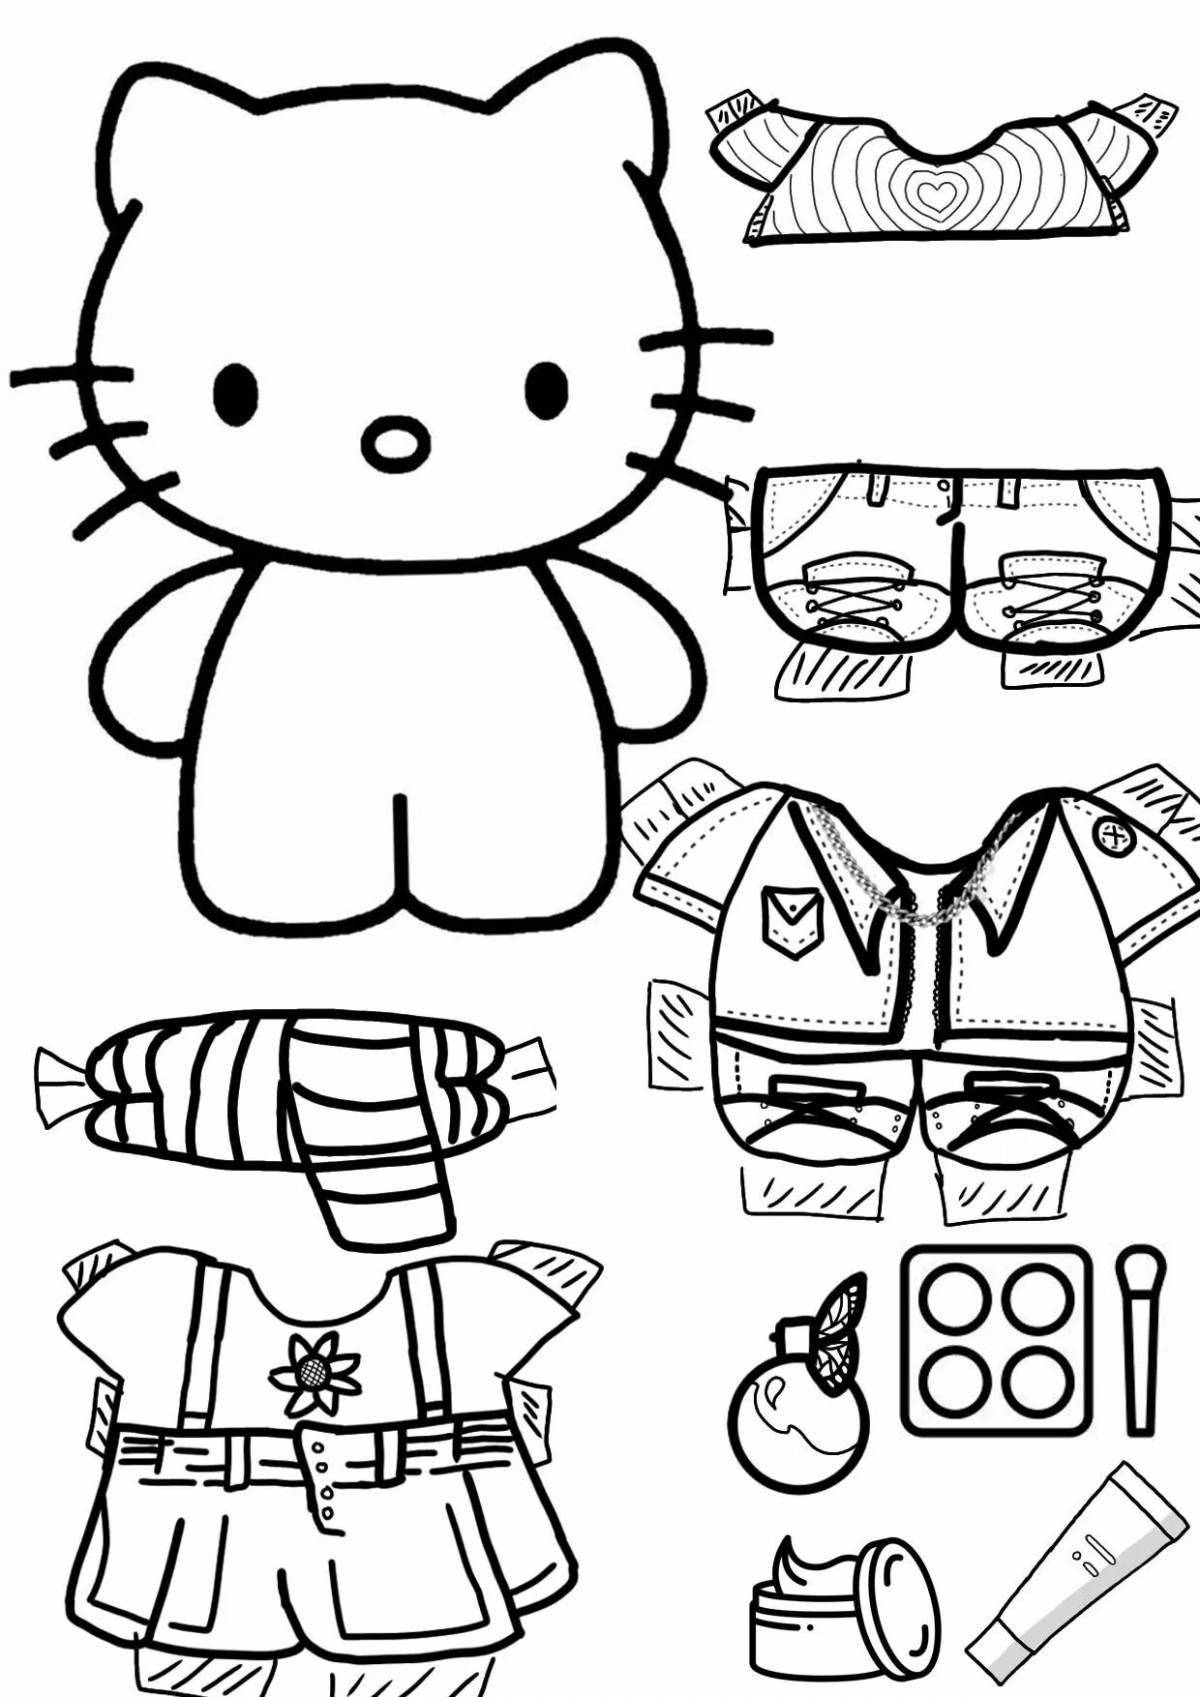 Perfect kitty coloring with clothes